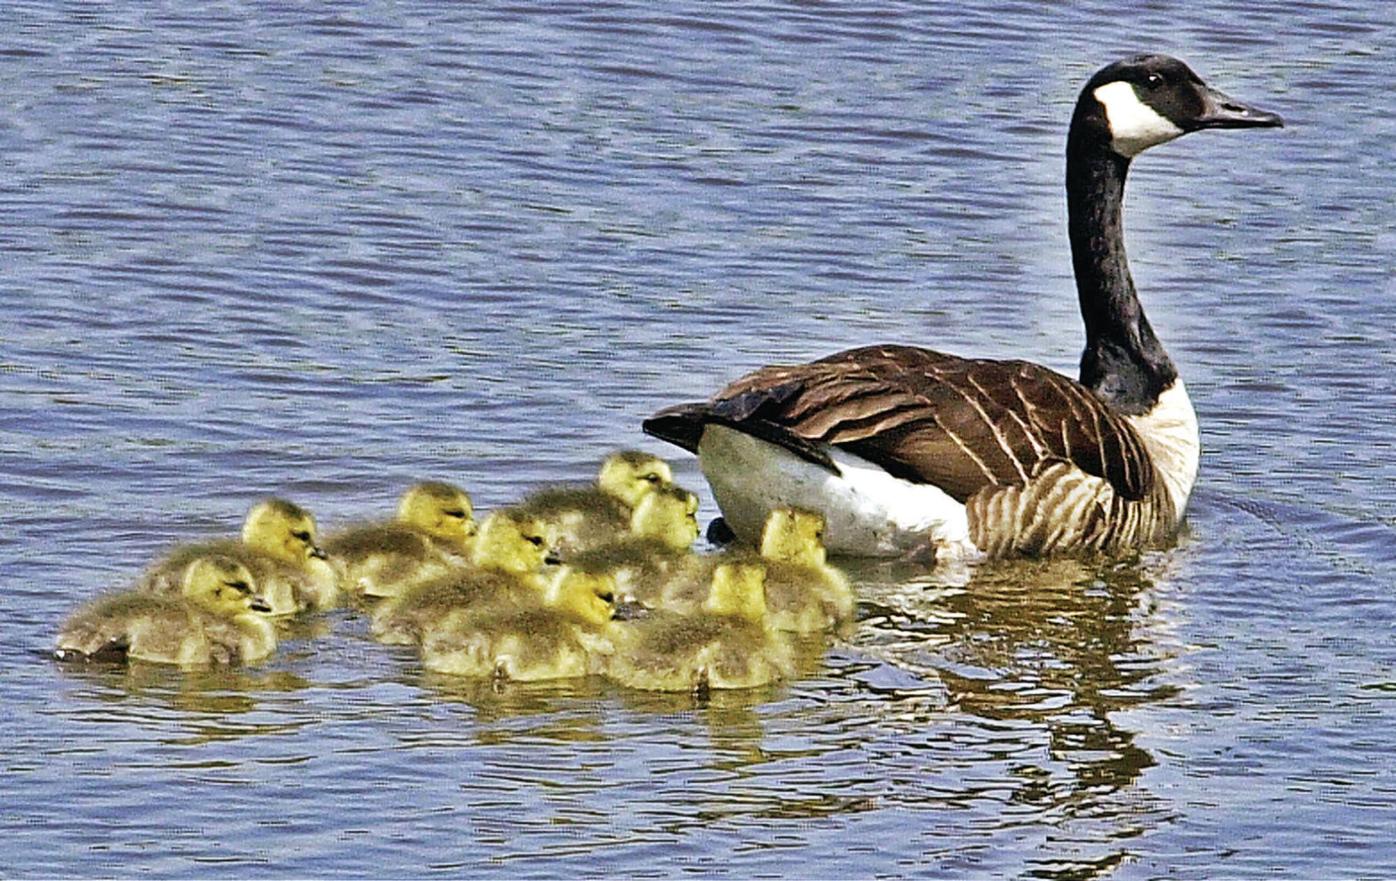 Thom Smith | Naturewatch: Lone mother goose spotted raising brood of  ducklings | Outdoors | benningtonbanner.com